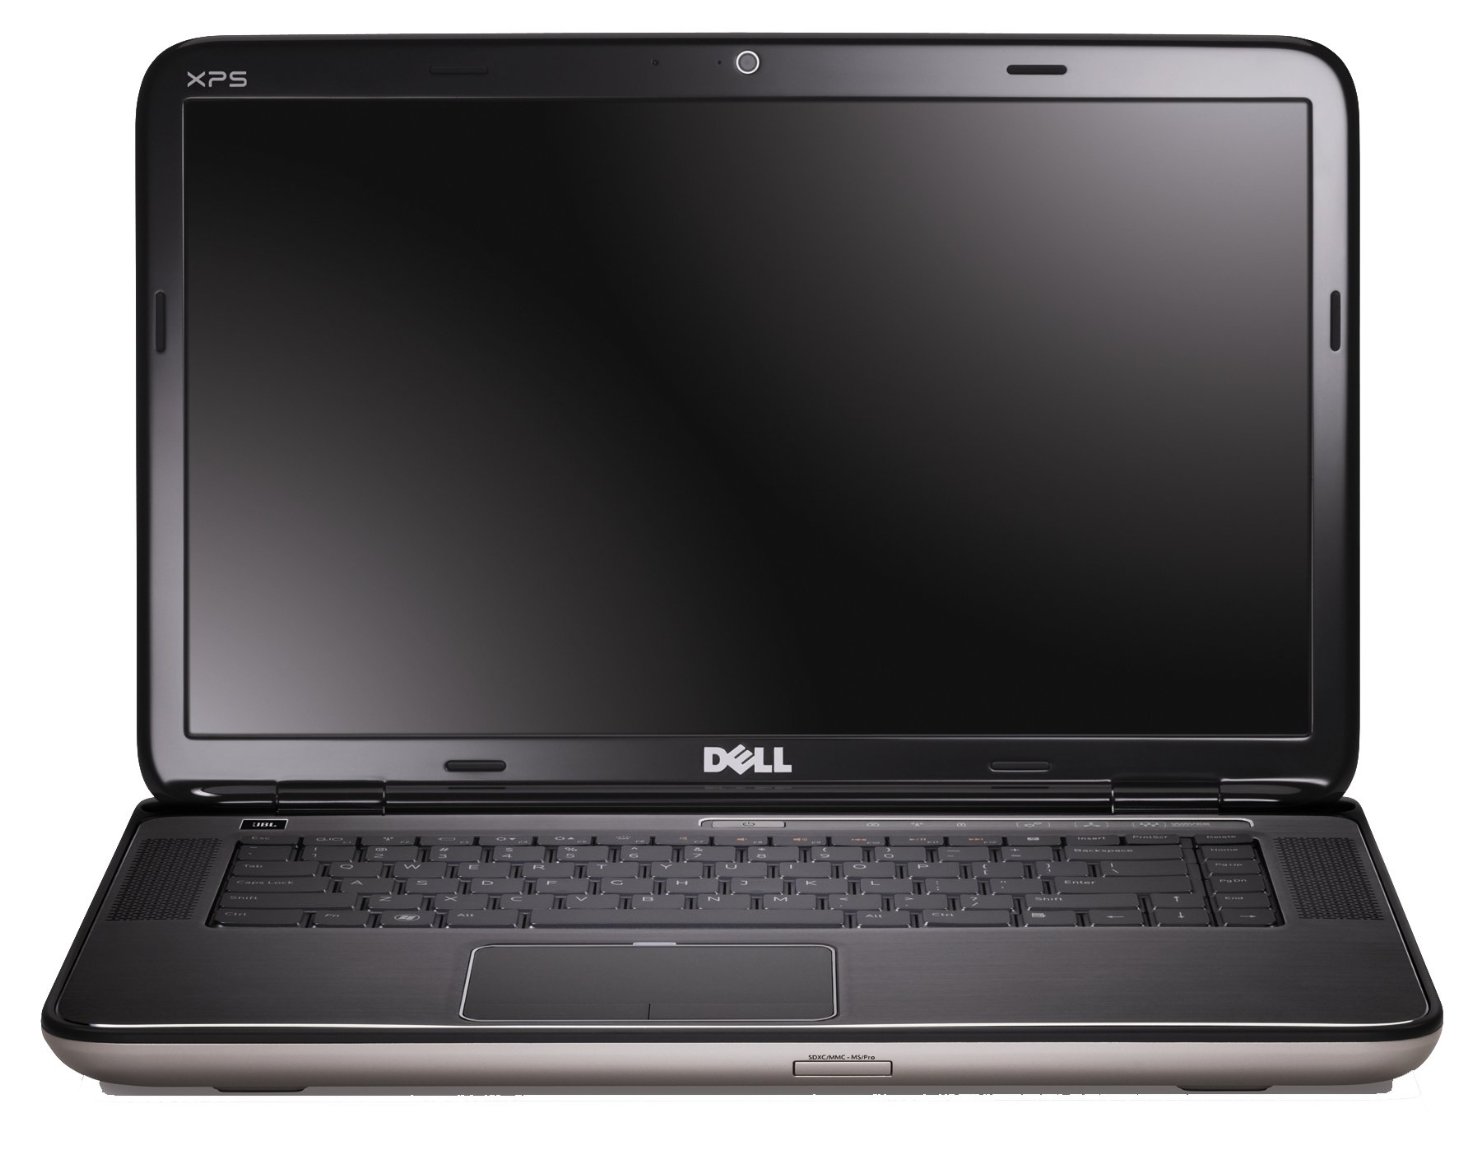  Dell XPS 15 9570-5772  #1